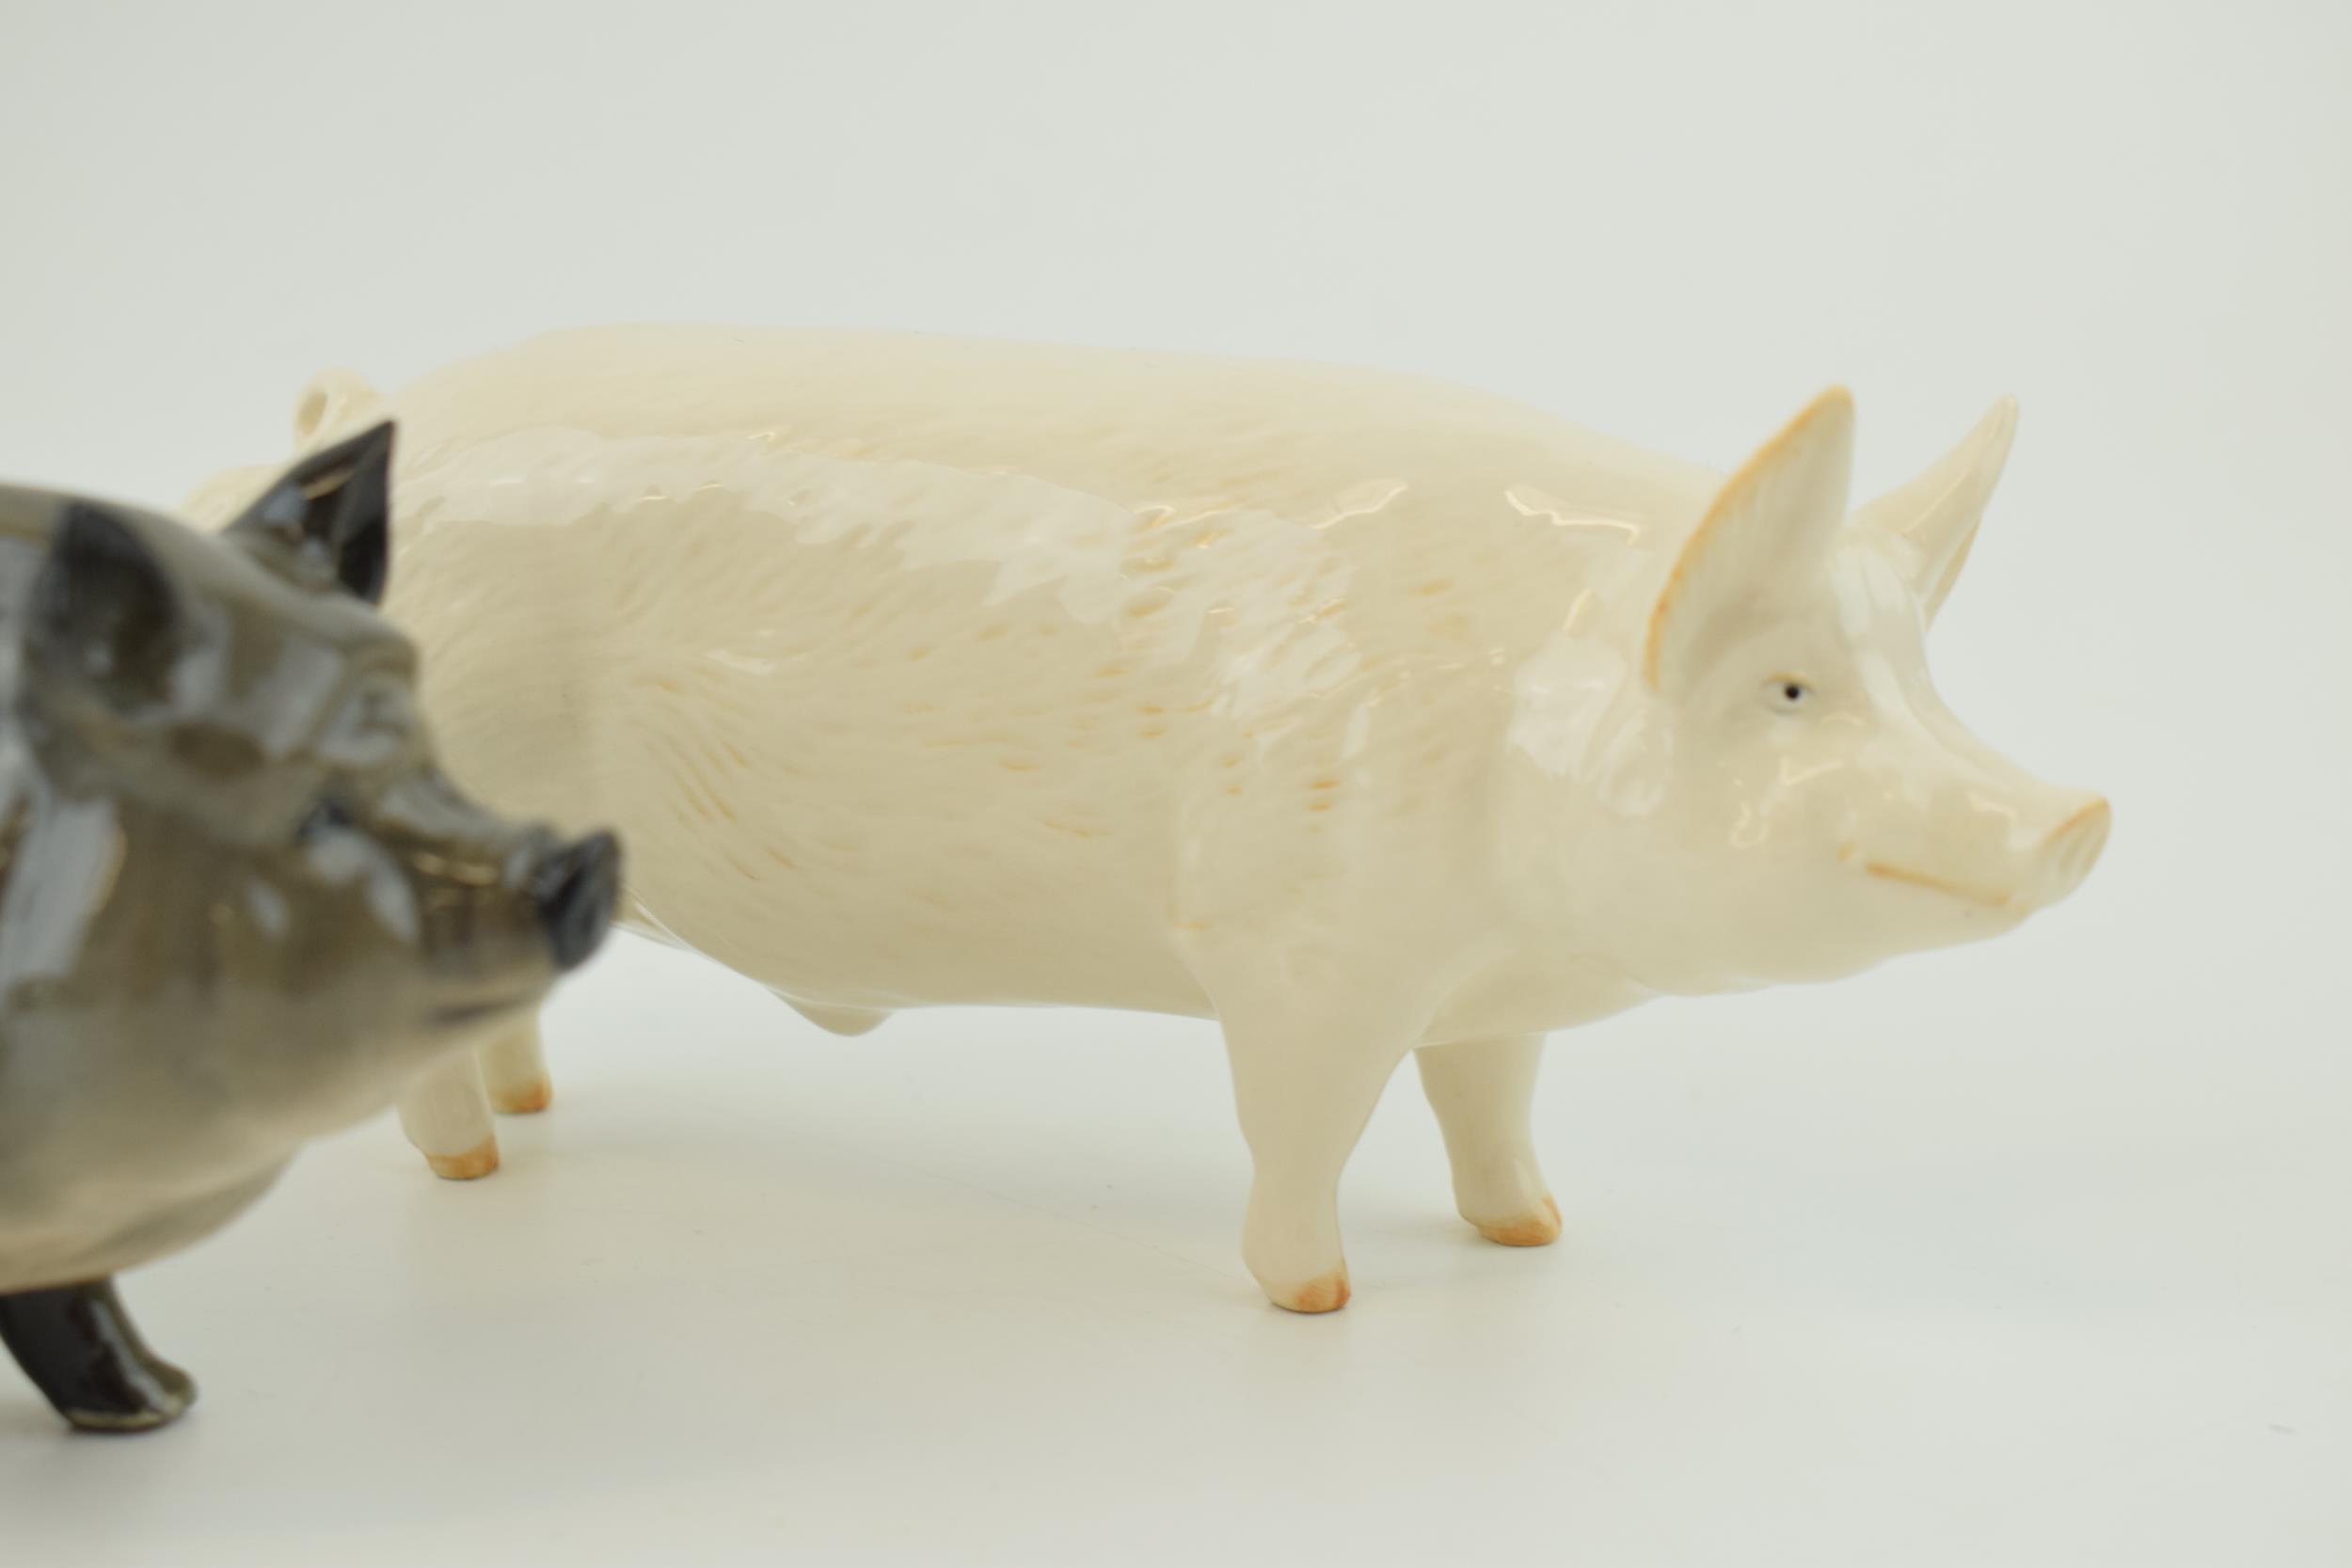 A trio of Royal Doulton pigs to include the Vietnamese Pot Bellied pig, a White Boar and a - Image 2 of 4